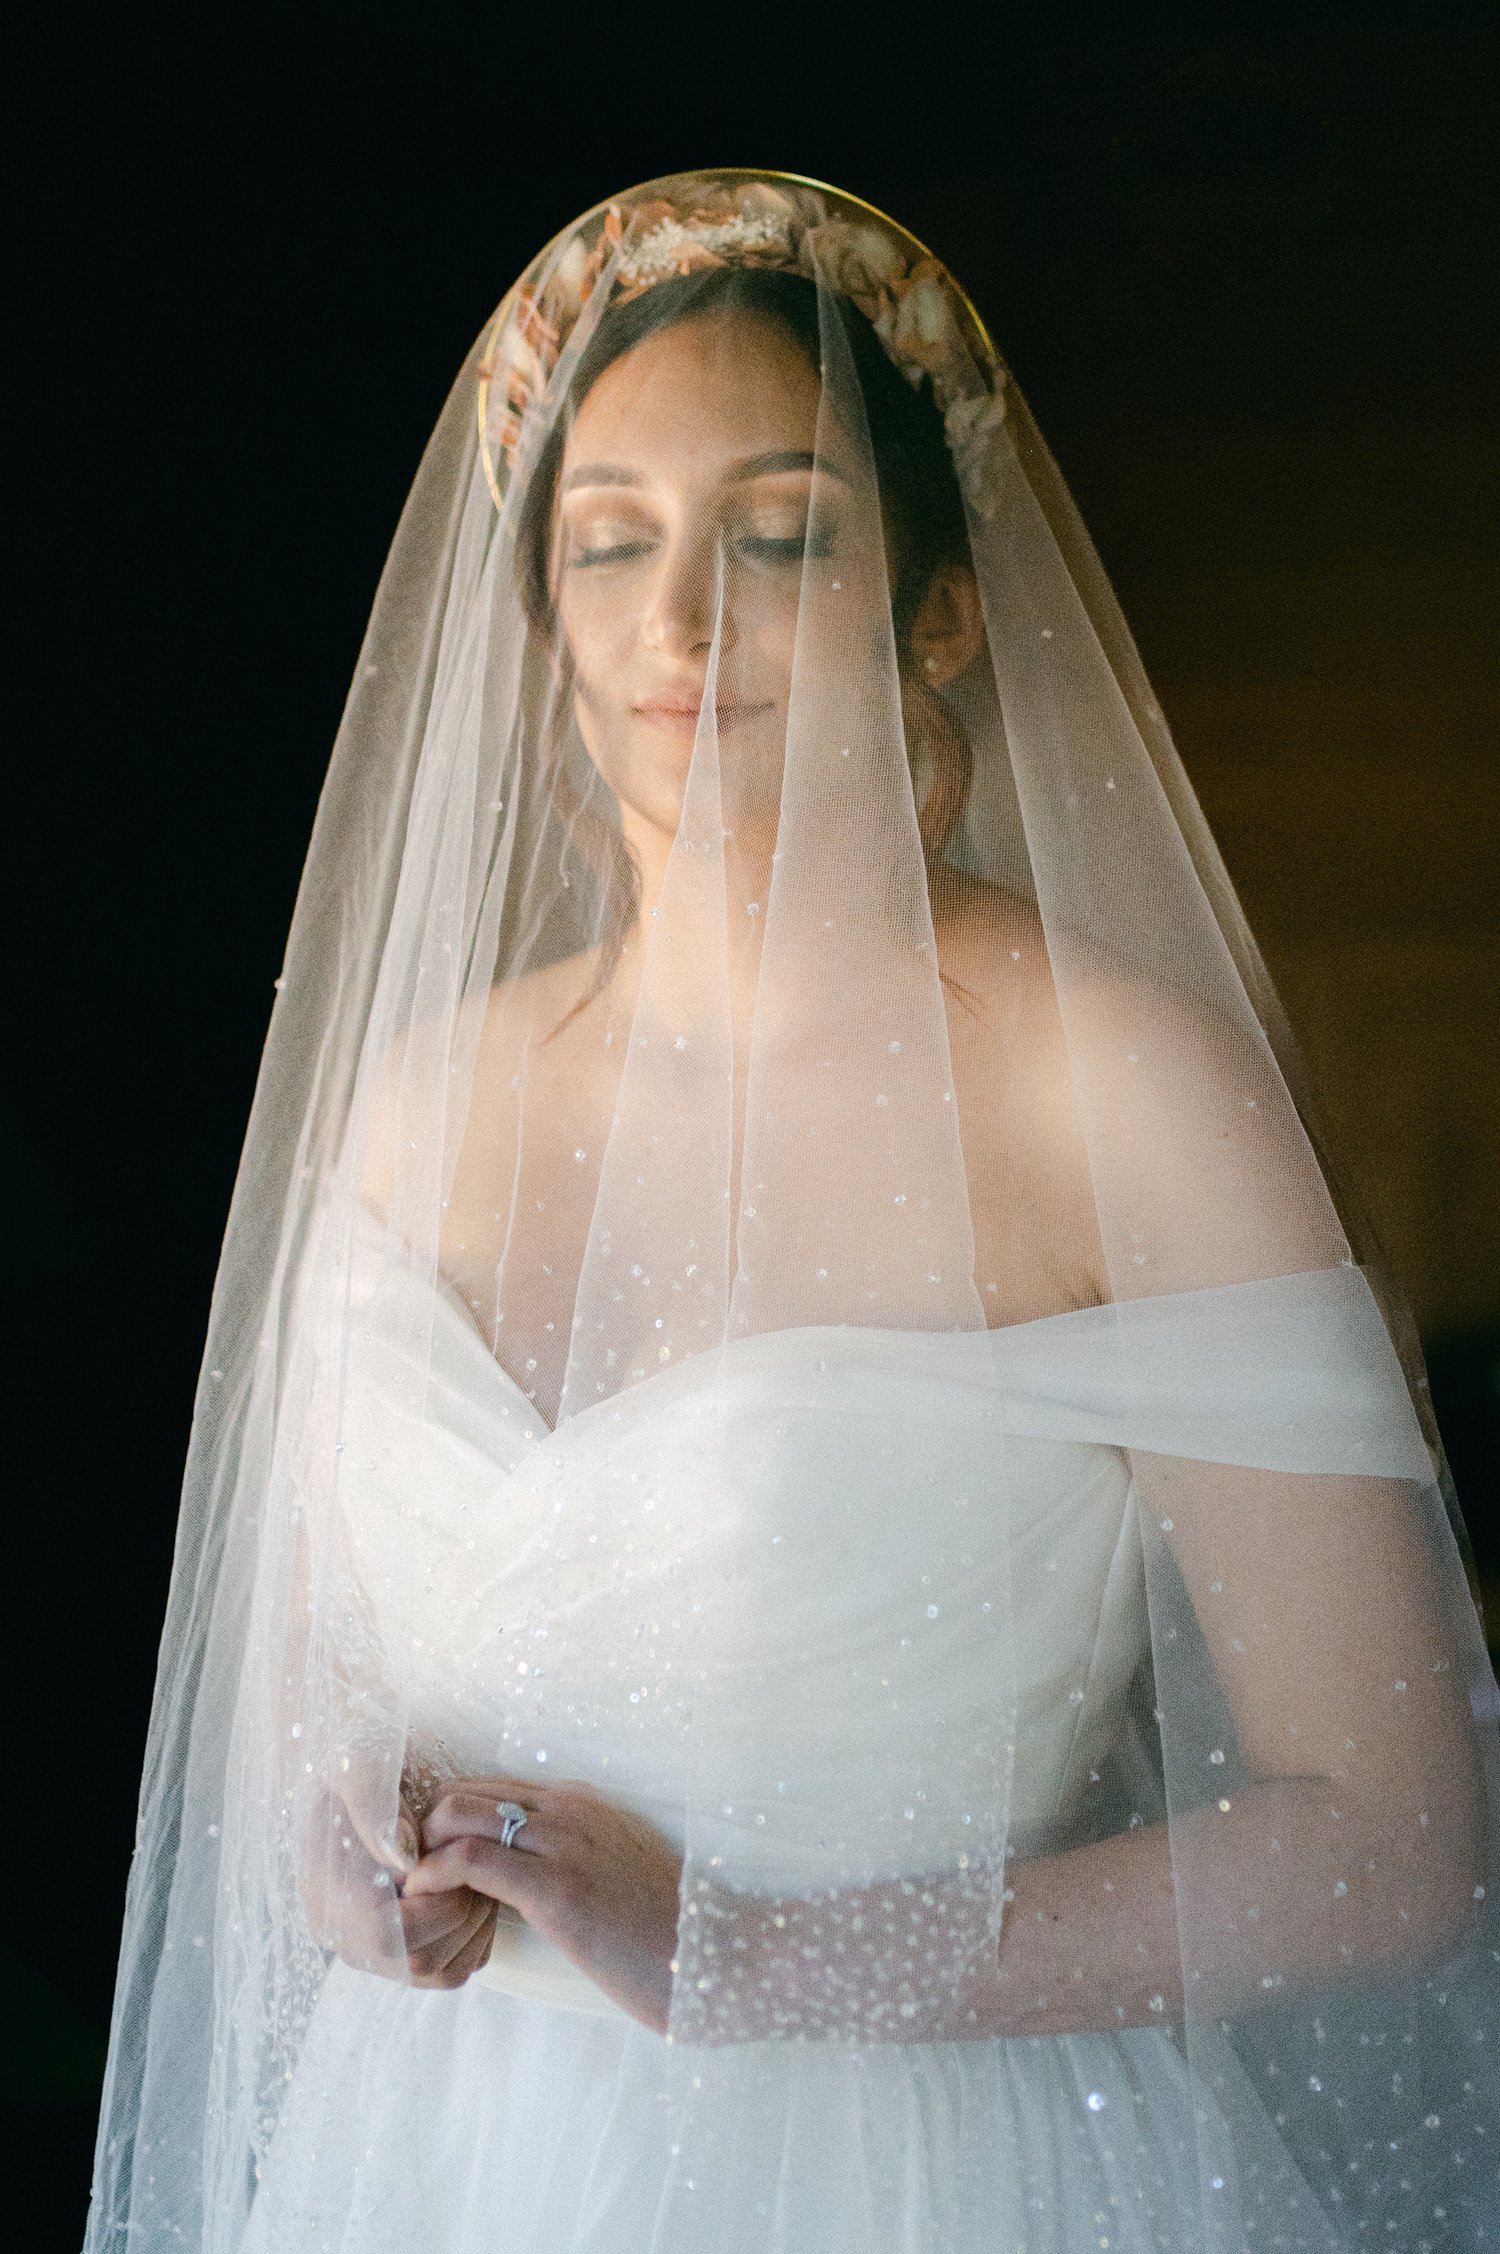 Nakoma Resort Wedding photography, photo of bride wearing her cathedral veil over her face